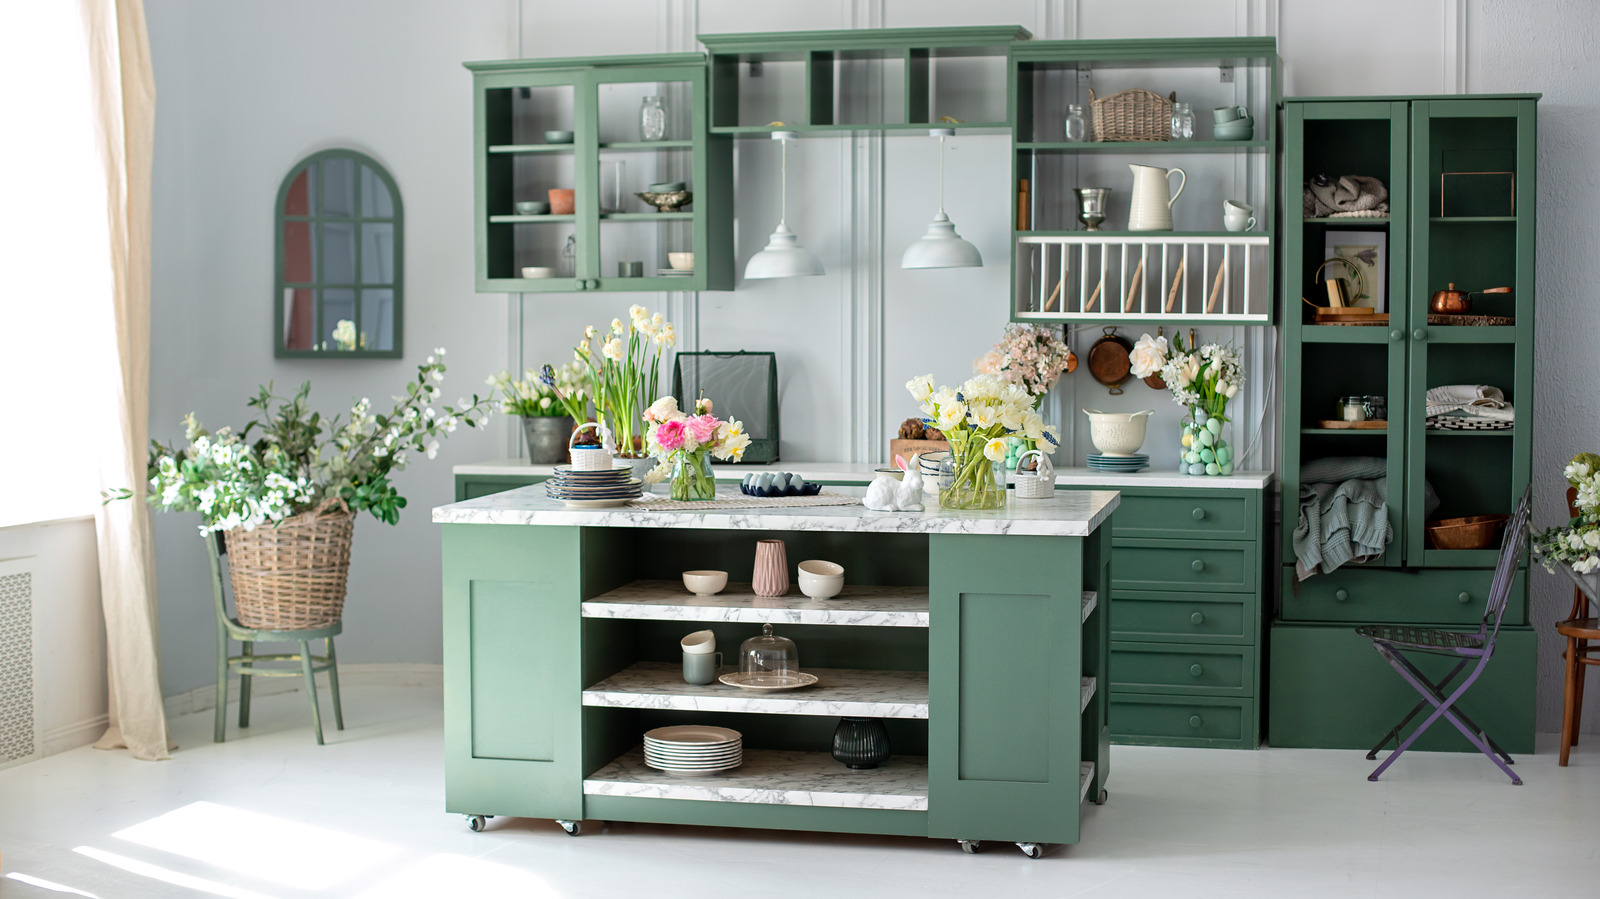 The Best Green Kitchen Designs For Your Next Renovation